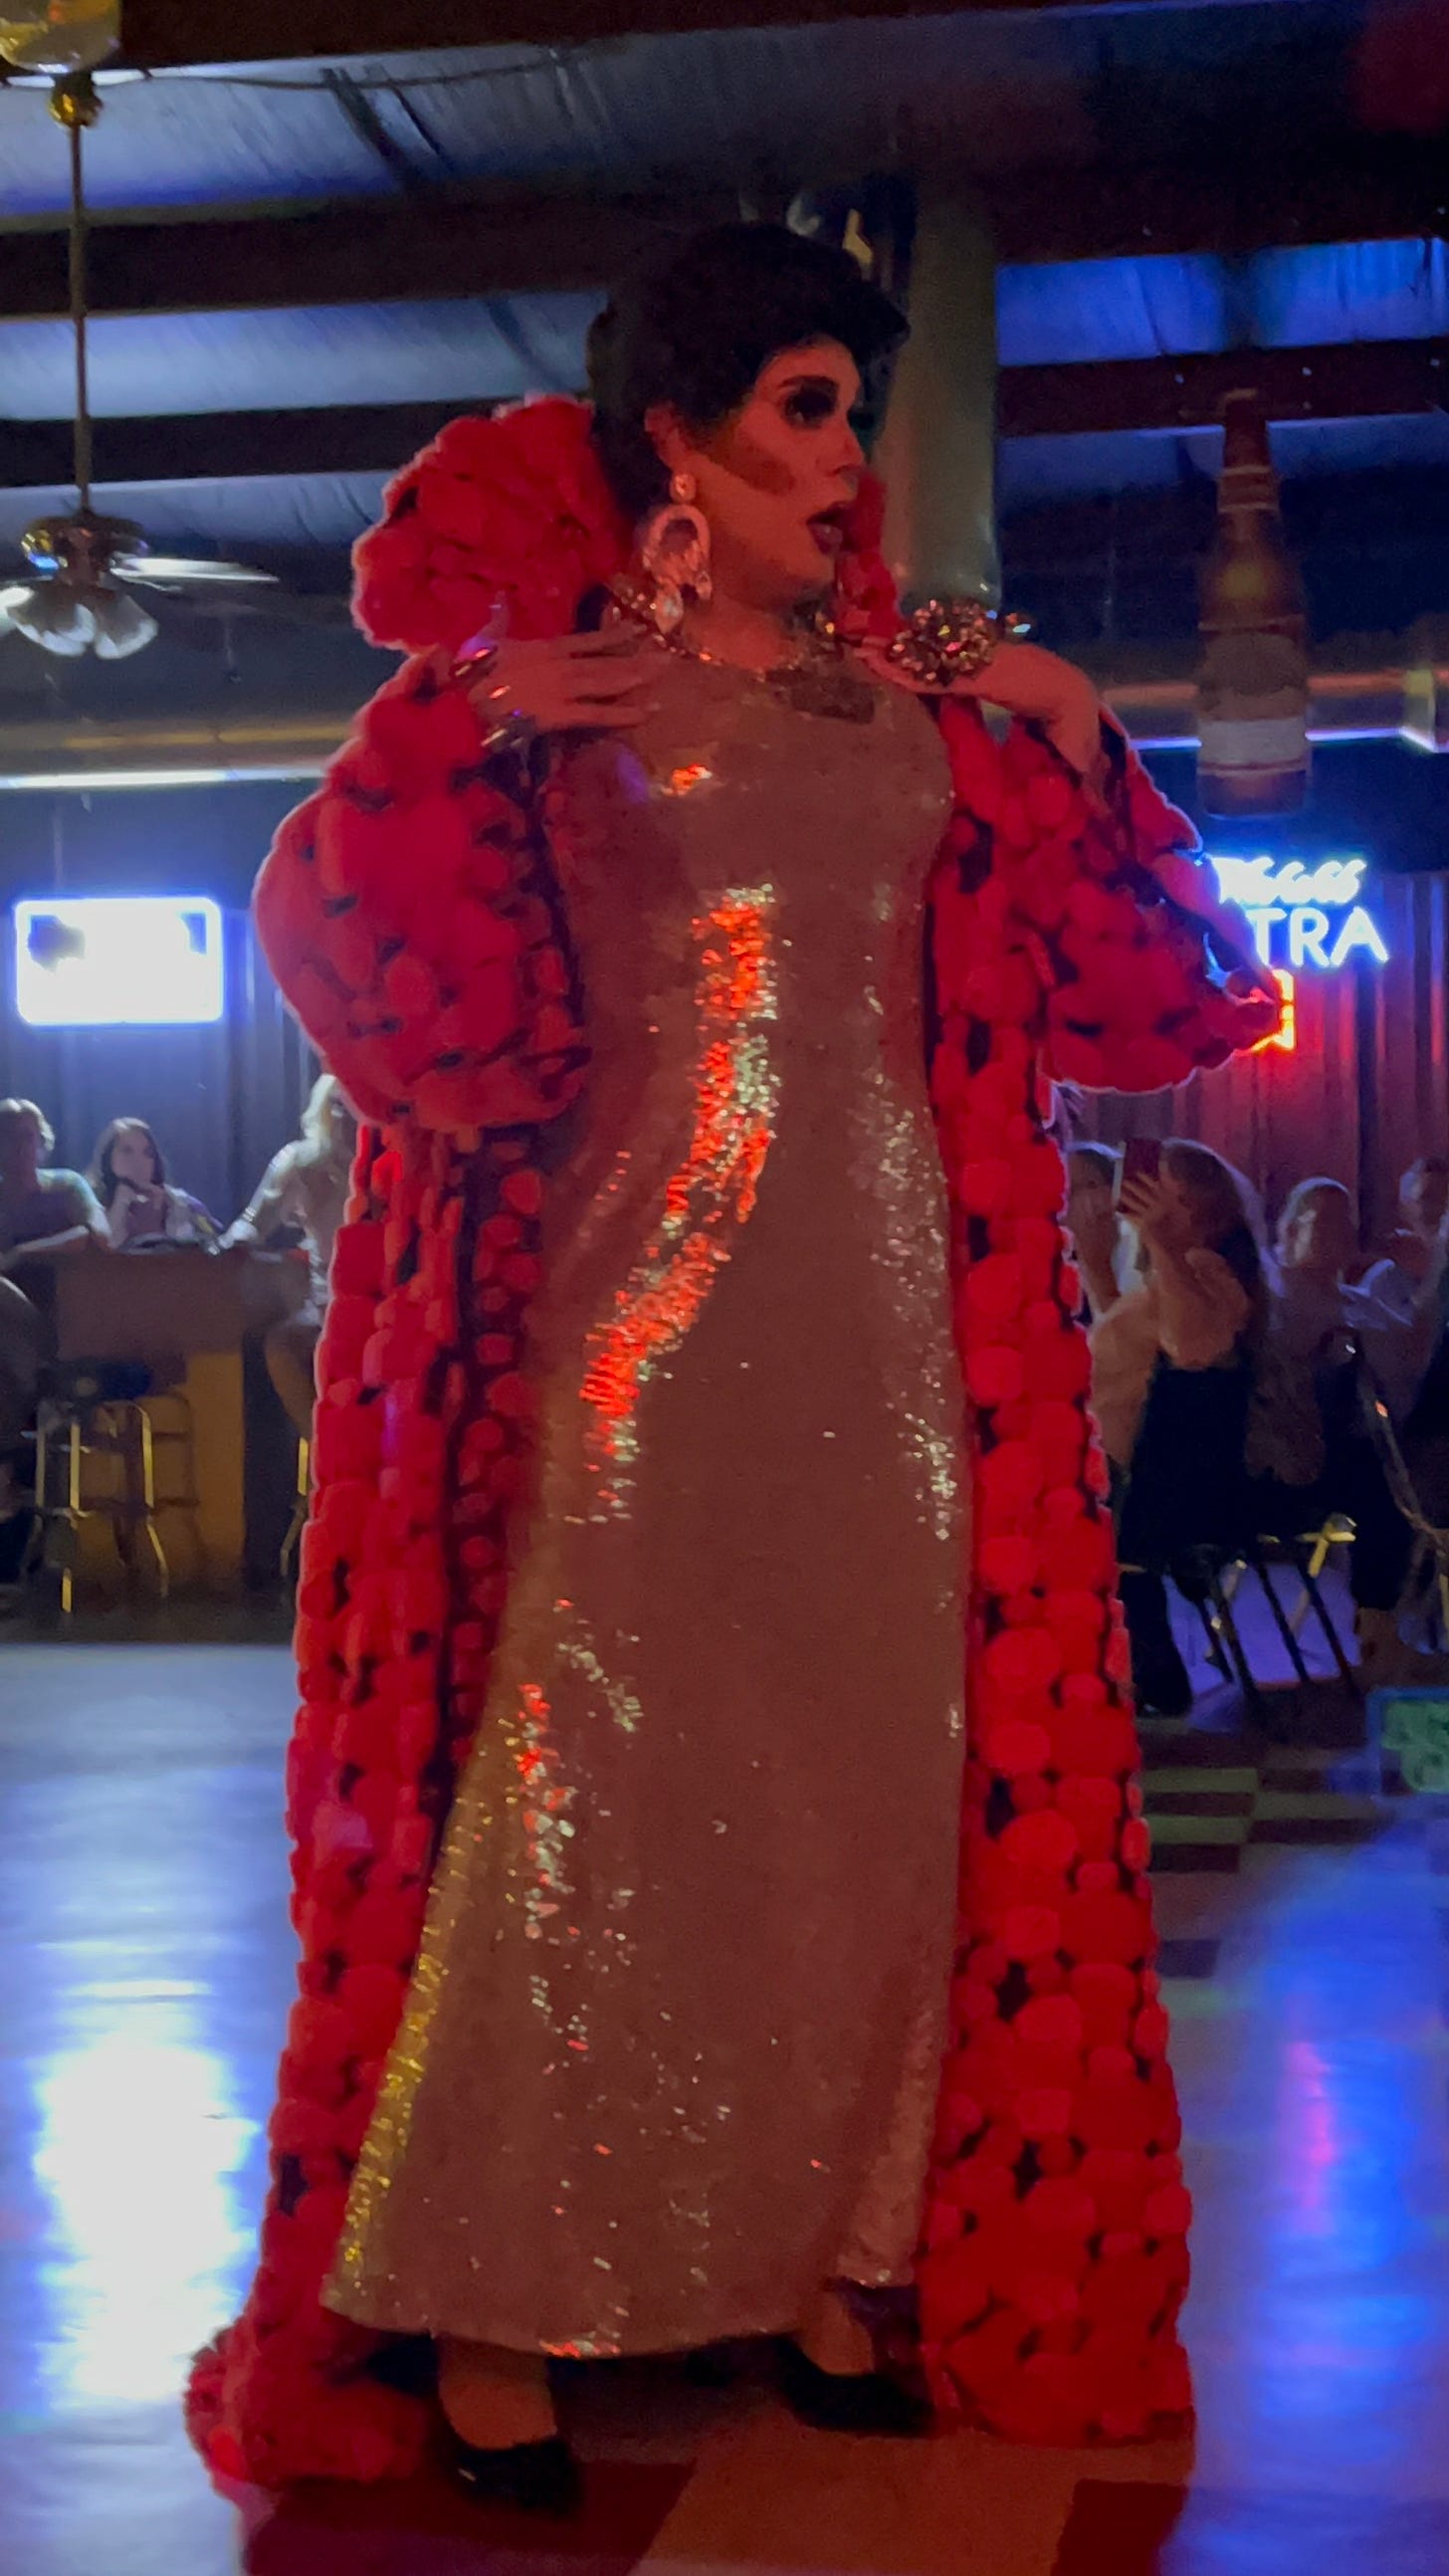 A drag queen with black hair and a fluffy robe performs in front of a crowd in the dimly lit Good Times Bar.